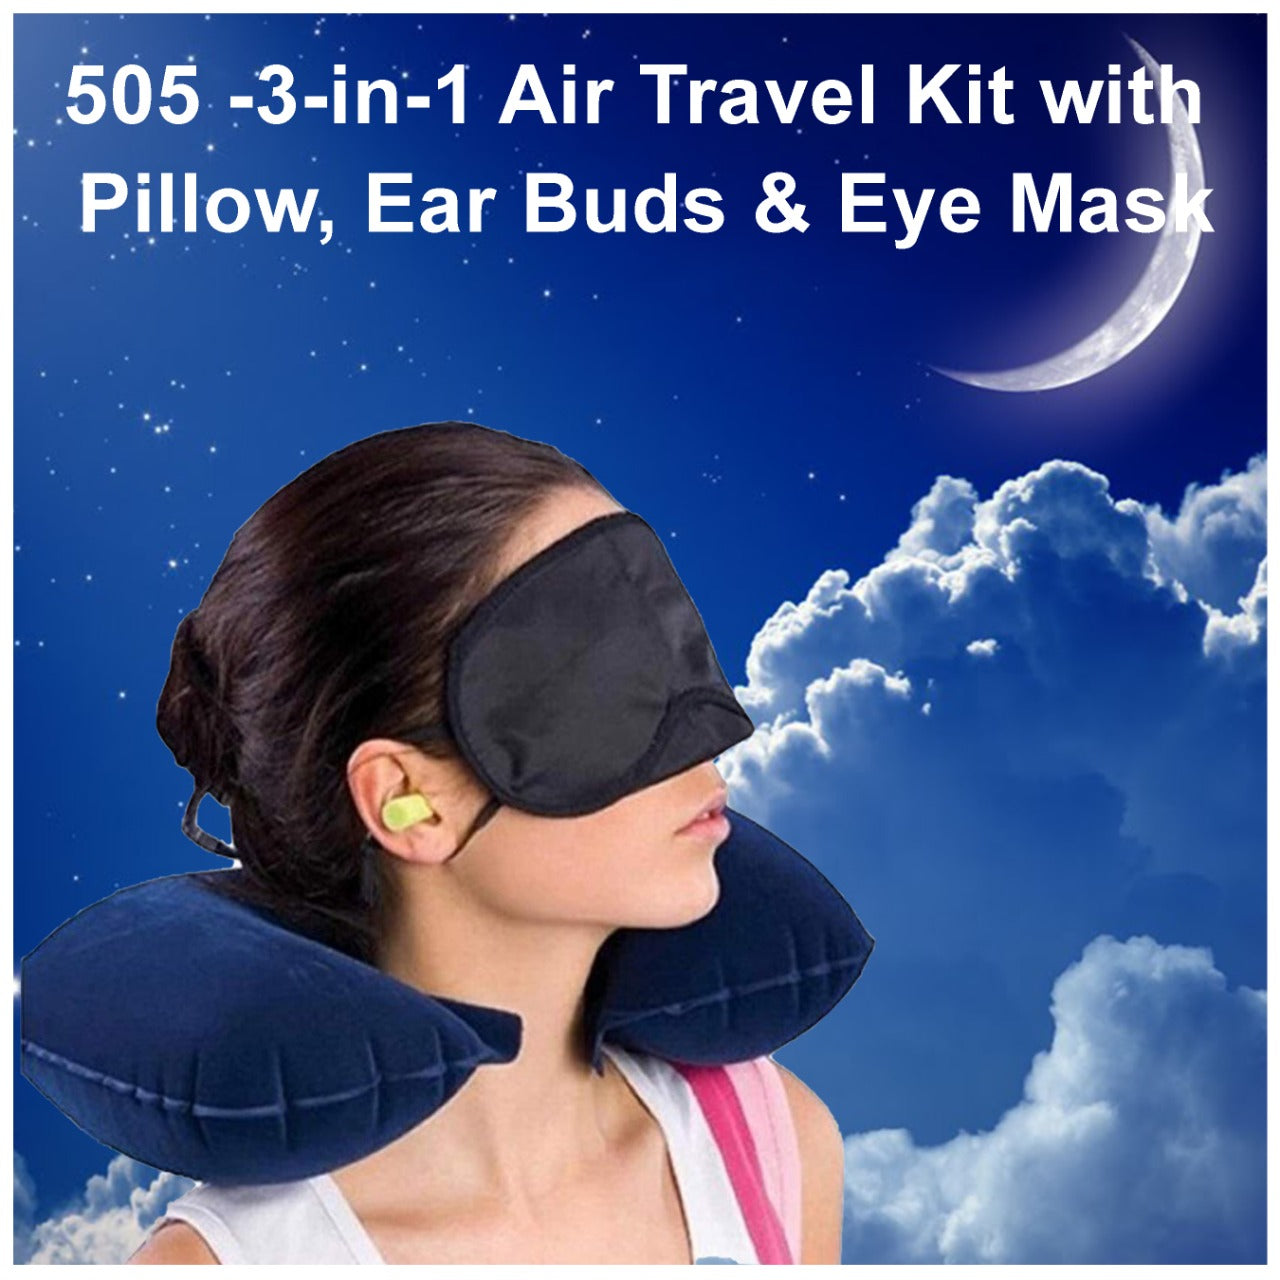 505 -3-in-1 Air Travel Kit with Pillow, Ear Buds & Eye Mask  WITH BZ LOGO